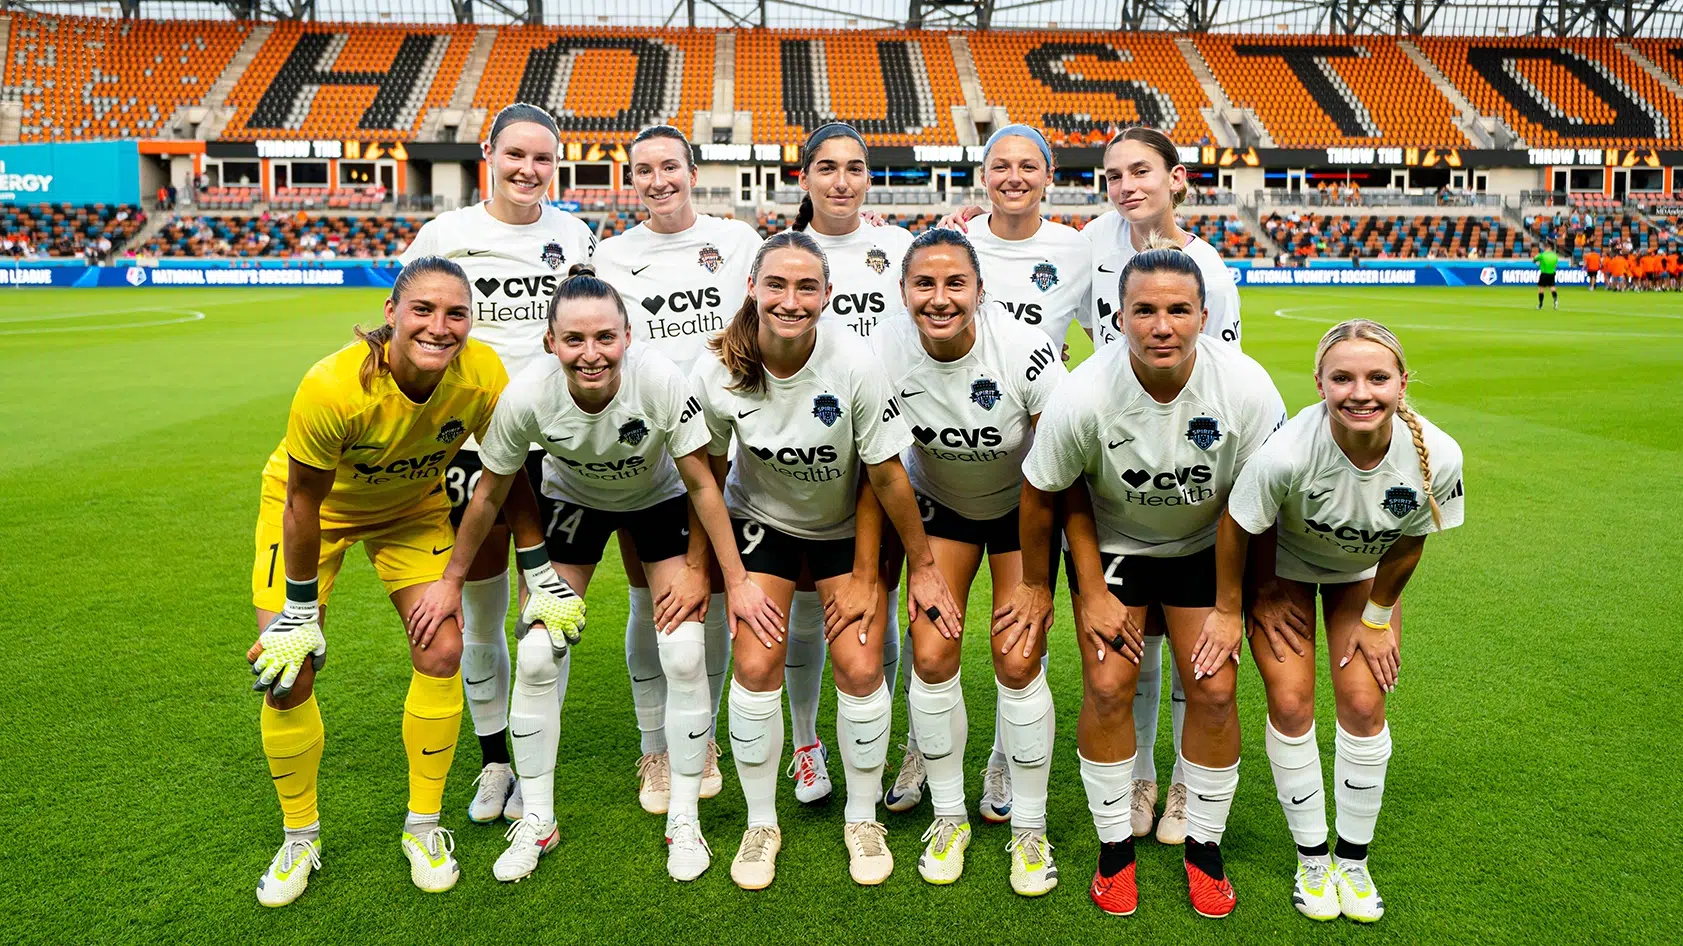 10 soccer players in white tops, black shorts and one goalie in all yellow pose for a starting eleven photo in two rows. In the background, the stadium's orange seats have 